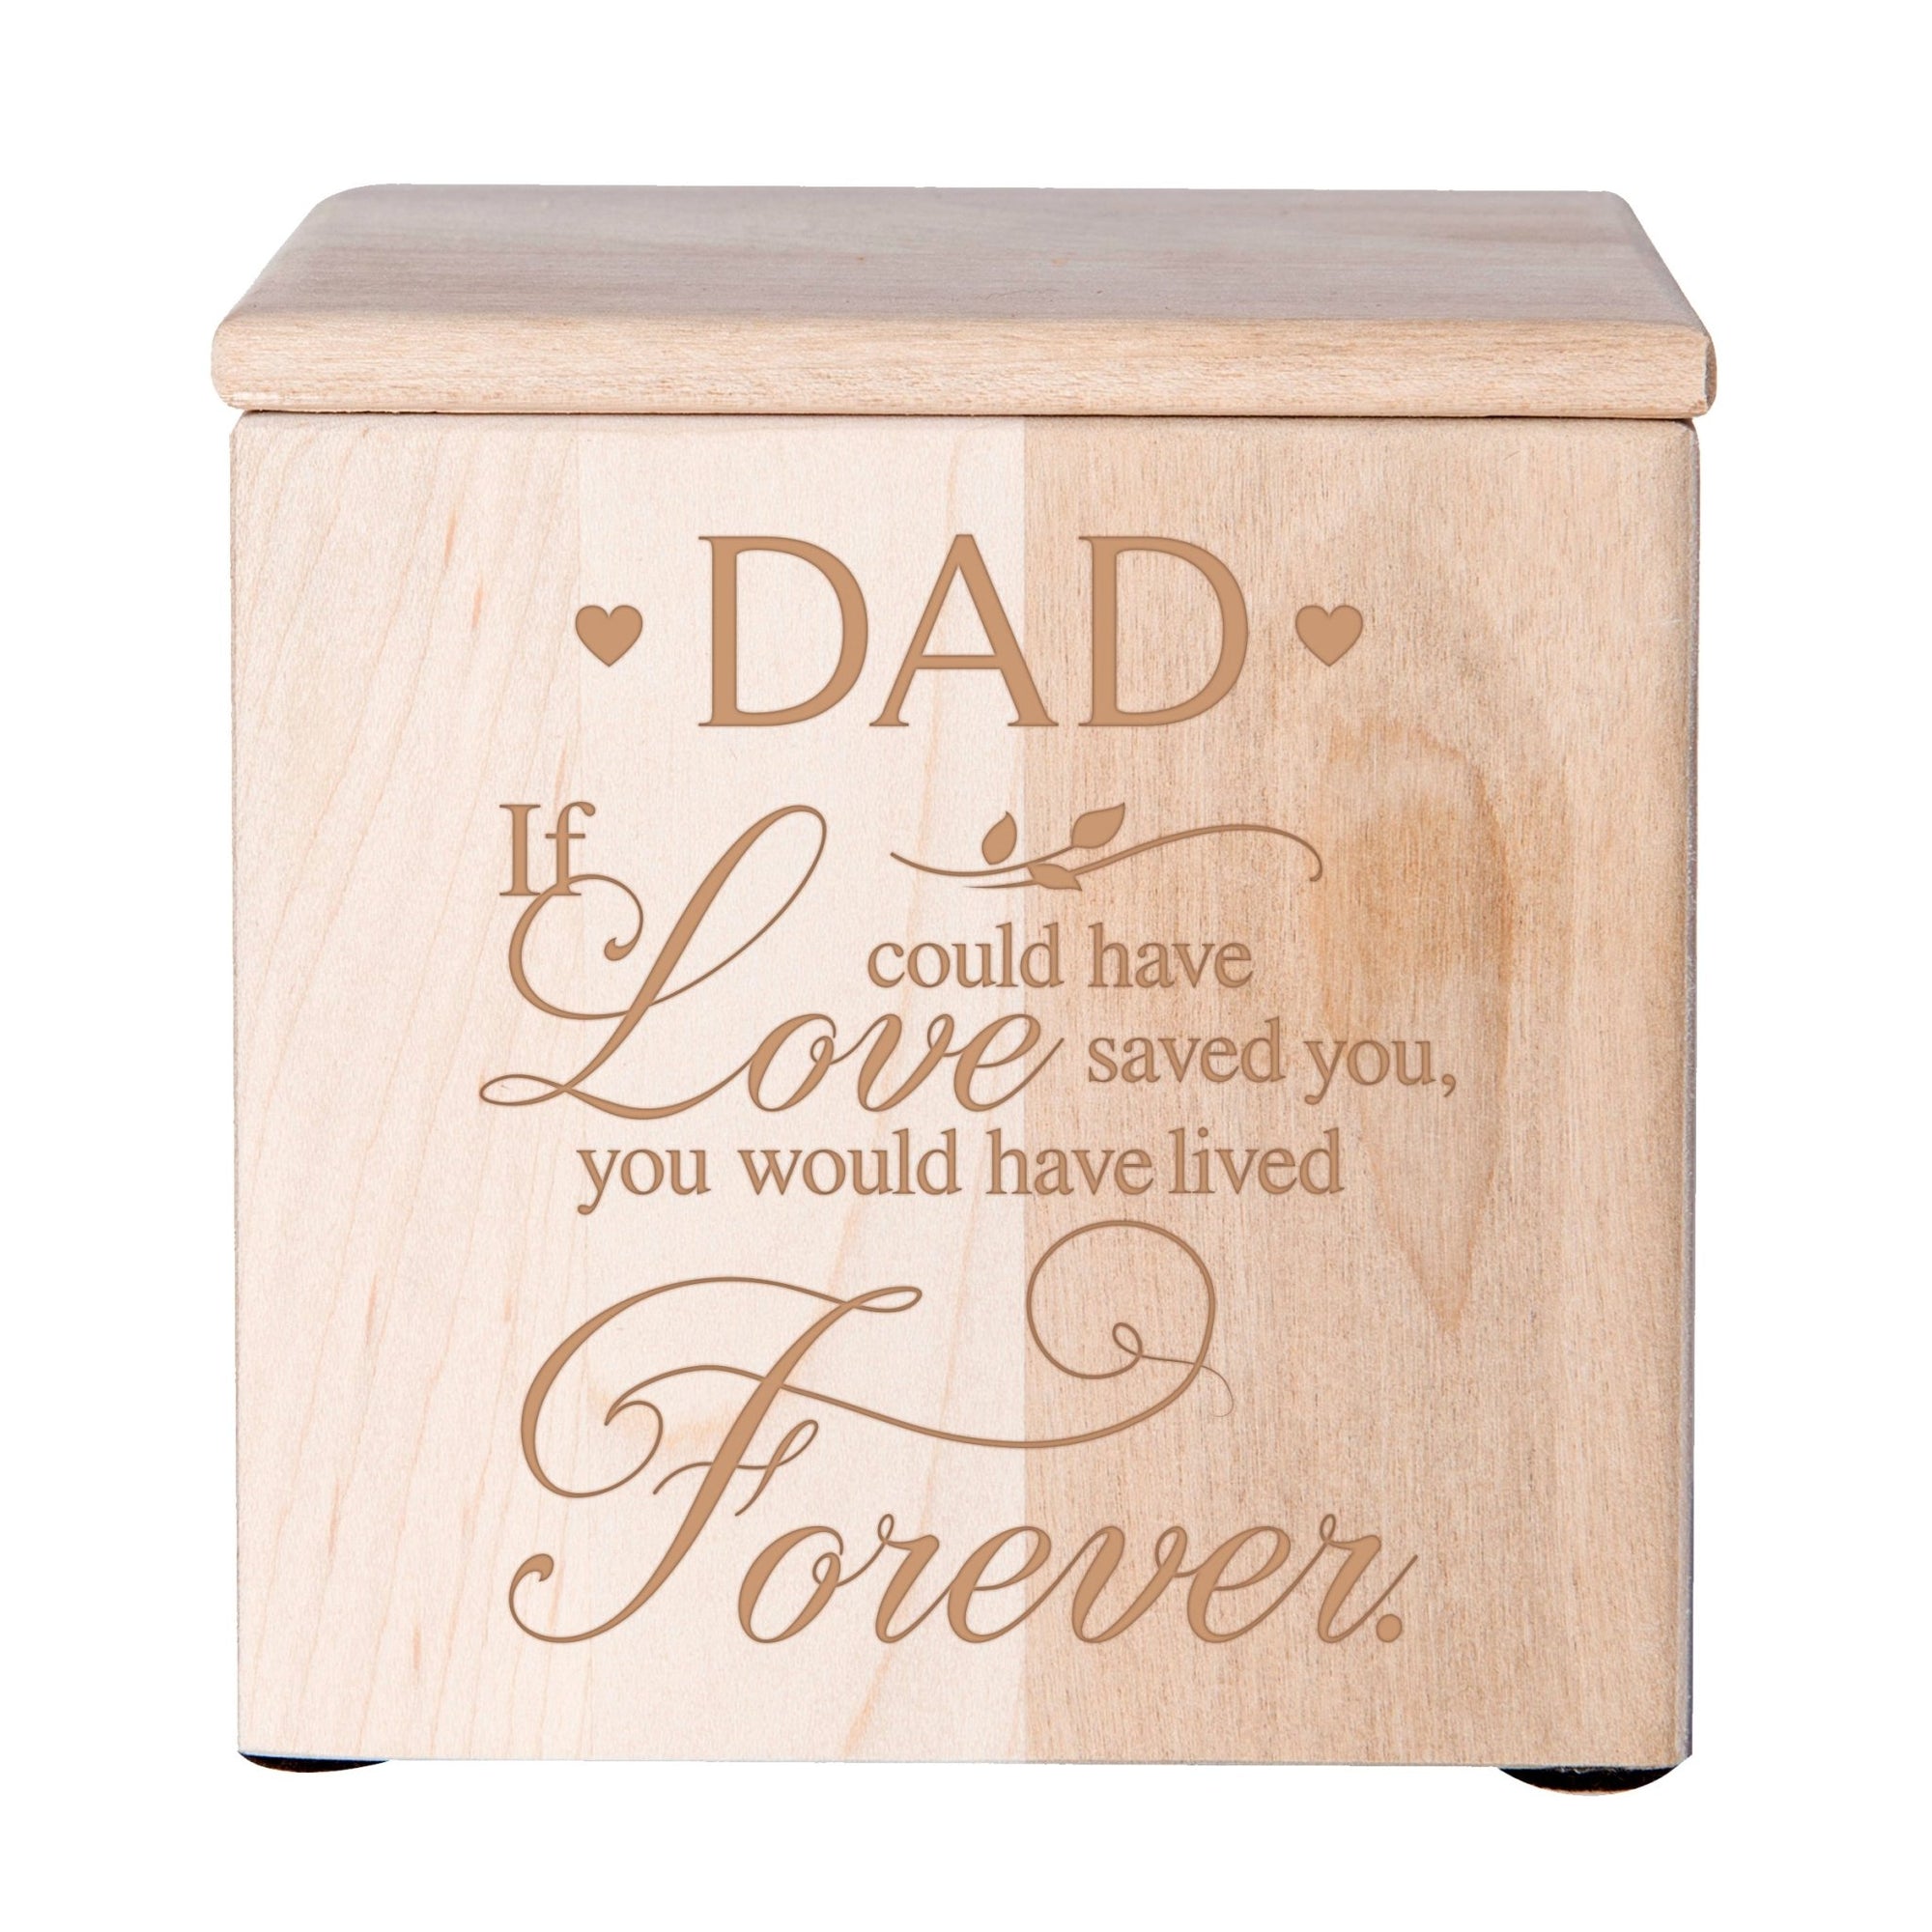 Modern Inspirational Memorial Wooden Cremation Urn Box 4.5x4.5in Holds 49 Cu Inches Of Human Ashes (If love could have saved Dad) Funeral and Commemorative Keepsake - LifeSong Milestones